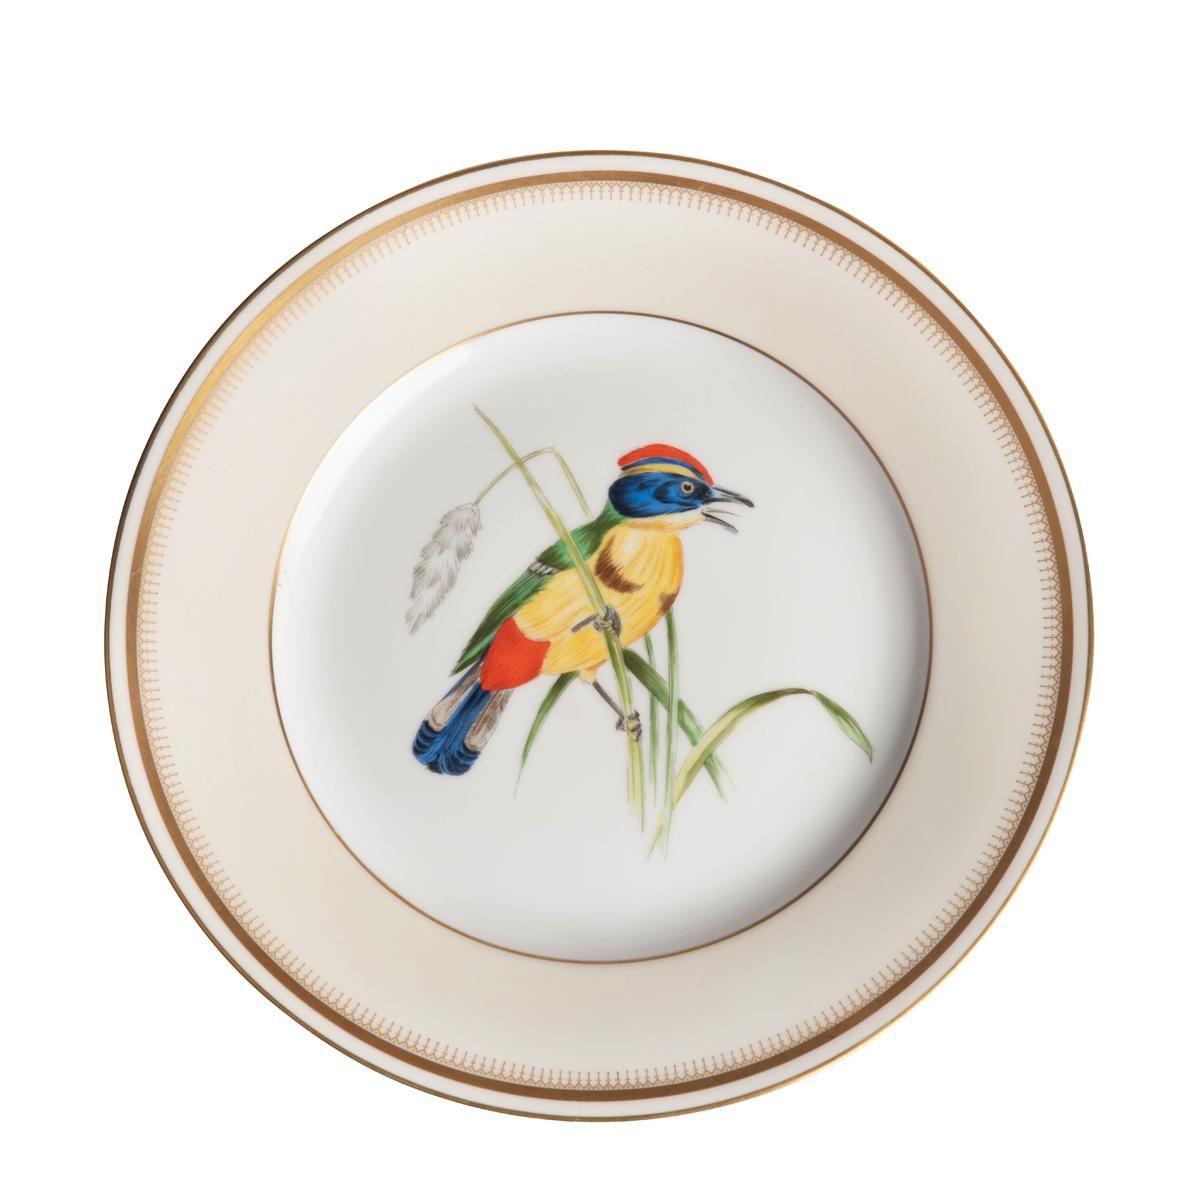 A set of 10 hand painted porcelain Vista Alegre dessert plates, each painted in bright colours with a different exotic Brazilian bird within a gilt hand chased border, the reverse with the name of the bird species, ‘VA Portugal’ in green and ‘Made